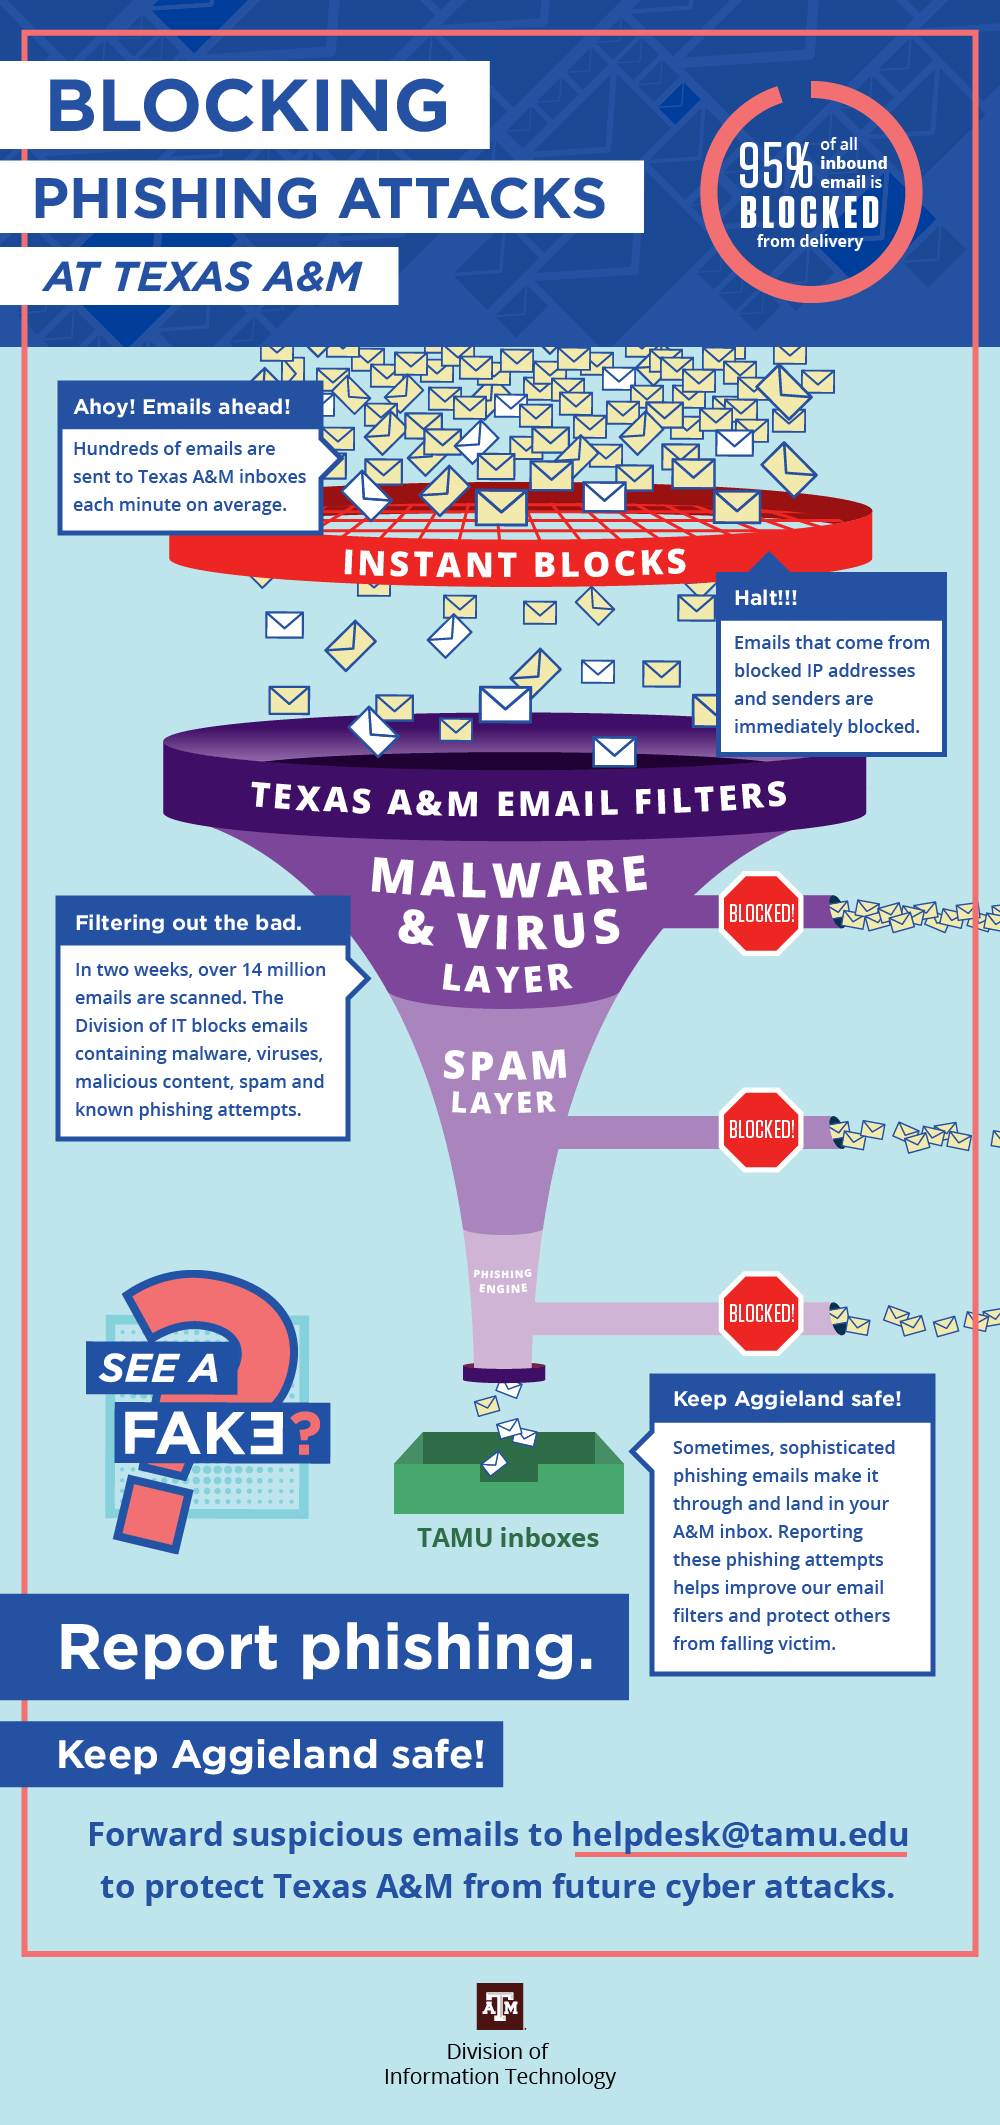 The Division of IT scans inbound email for malware, viruses, spam and phishing to keep as many malicious emails from TAMU inboxes as possible.